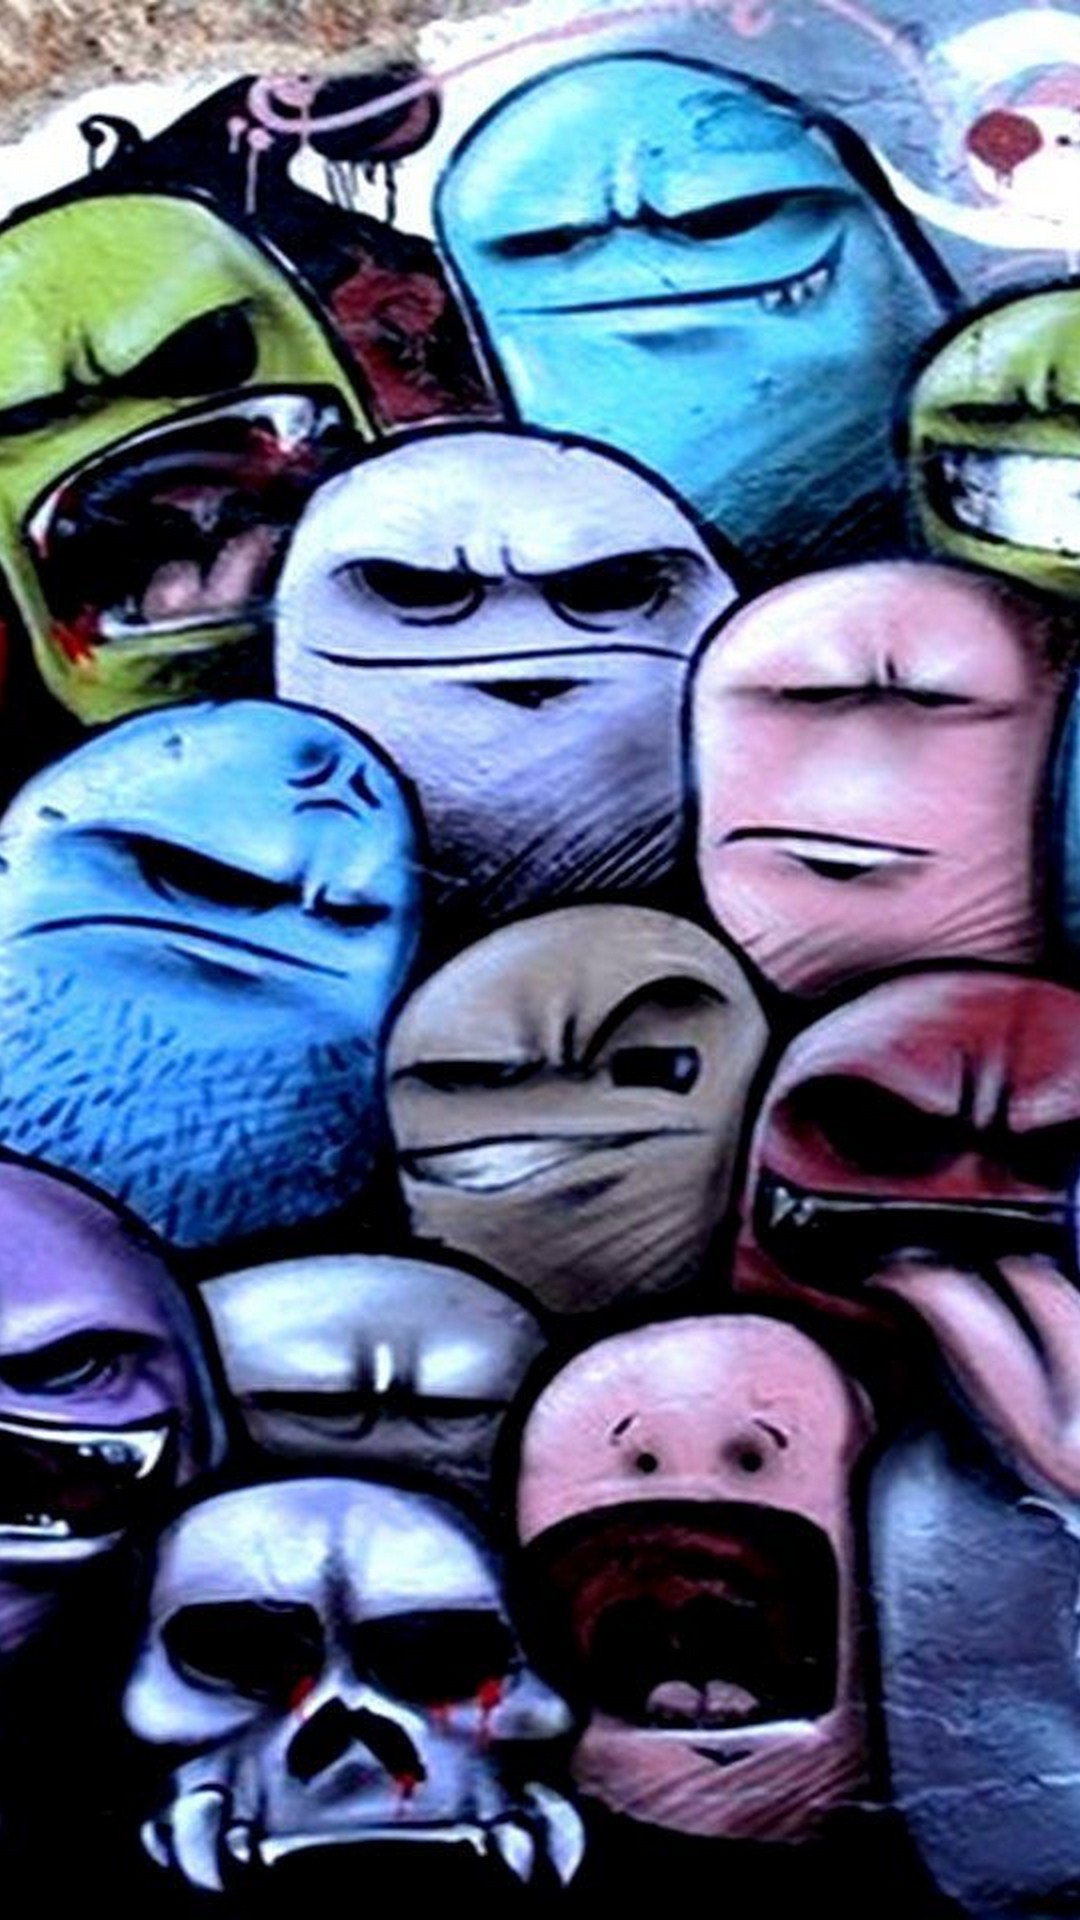 Wallpaper Graffiti Characters Android with image resolution 1080x1920 pixel. You can make this wallpaper for your Android backgrounds, Tablet, Smartphones Screensavers and Mobile Phone Lock Screen